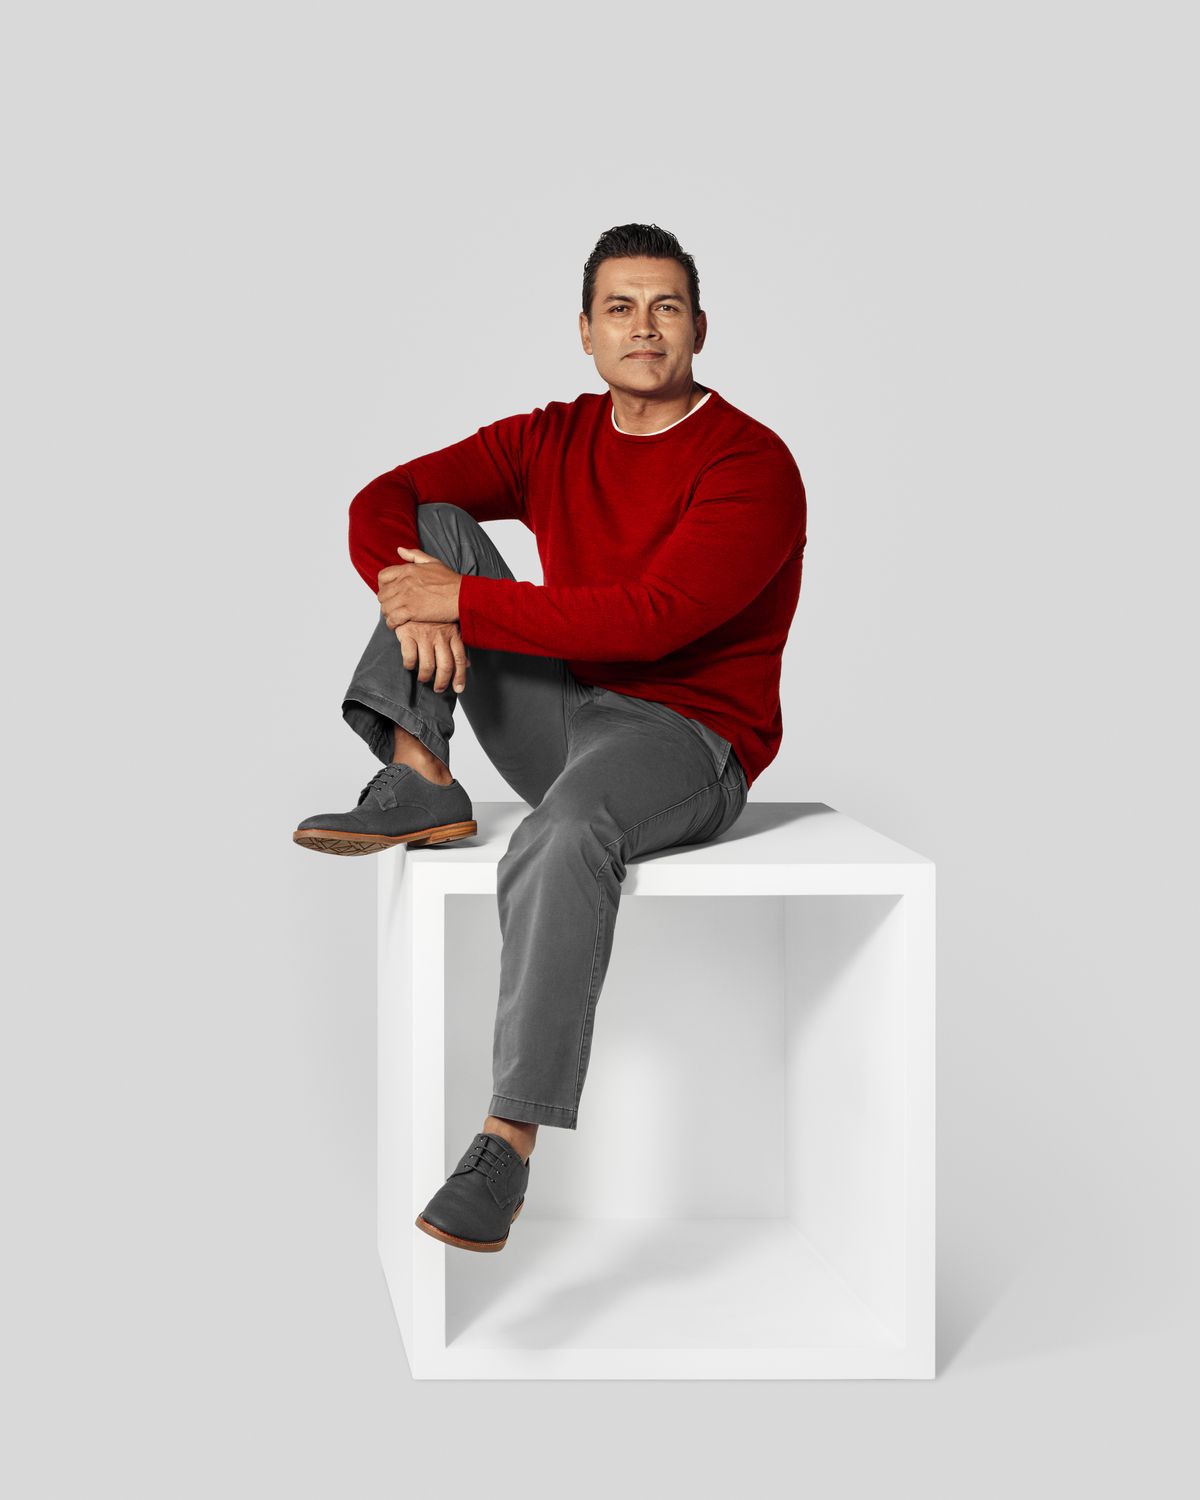 Man in red sweater sitting on top a white box